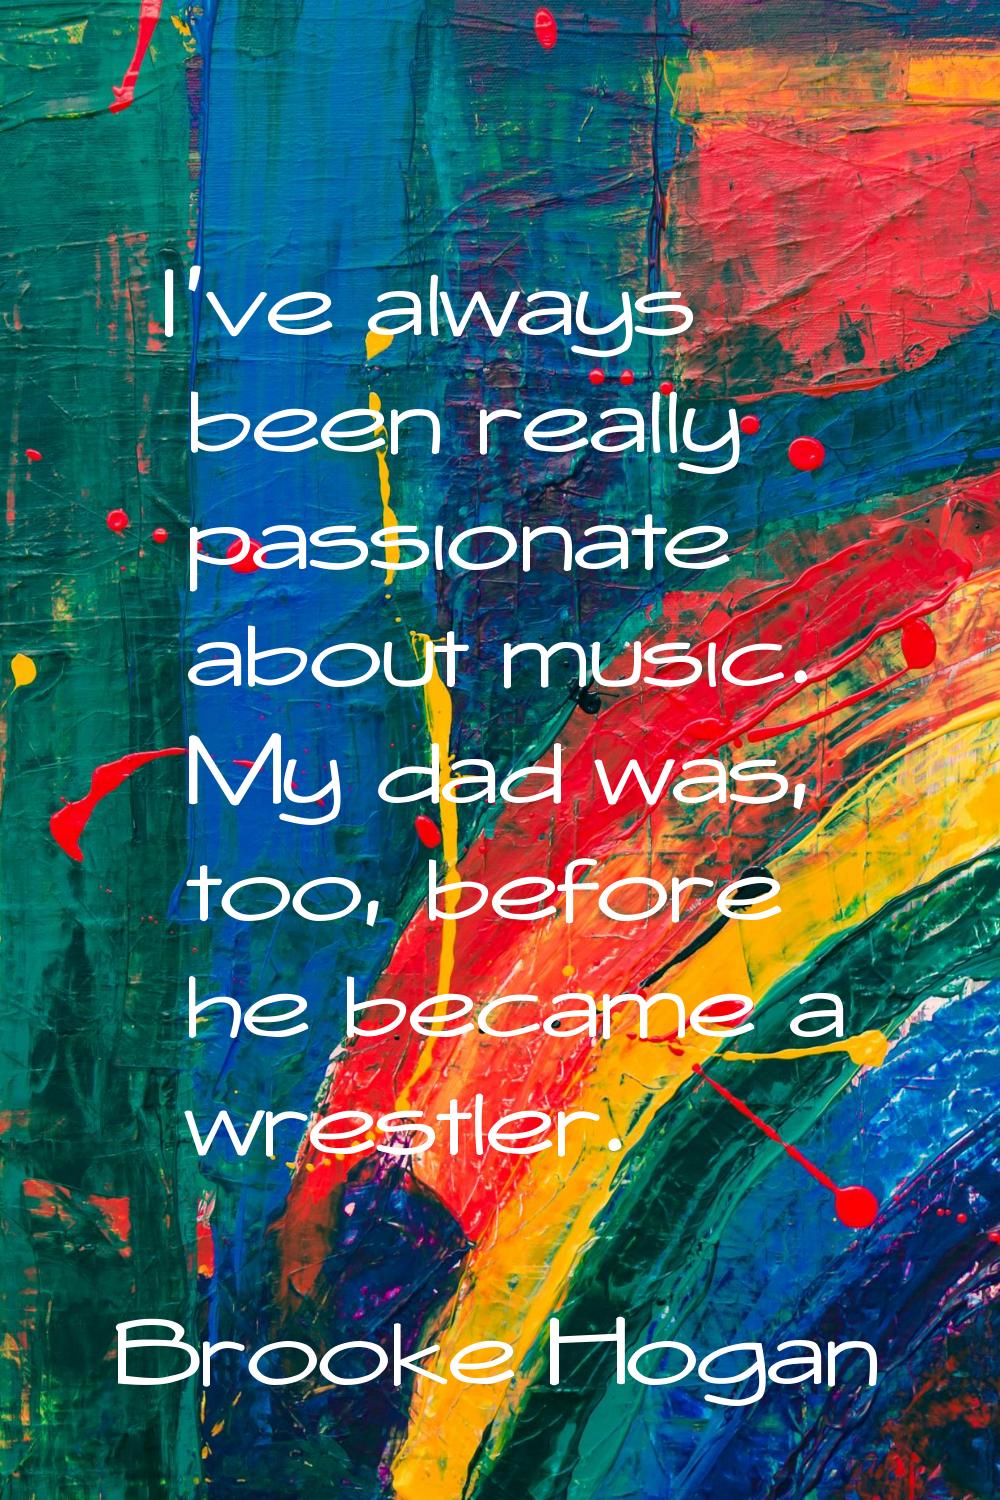 I've always been really passionate about music. My dad was, too, before he became a wrestler.